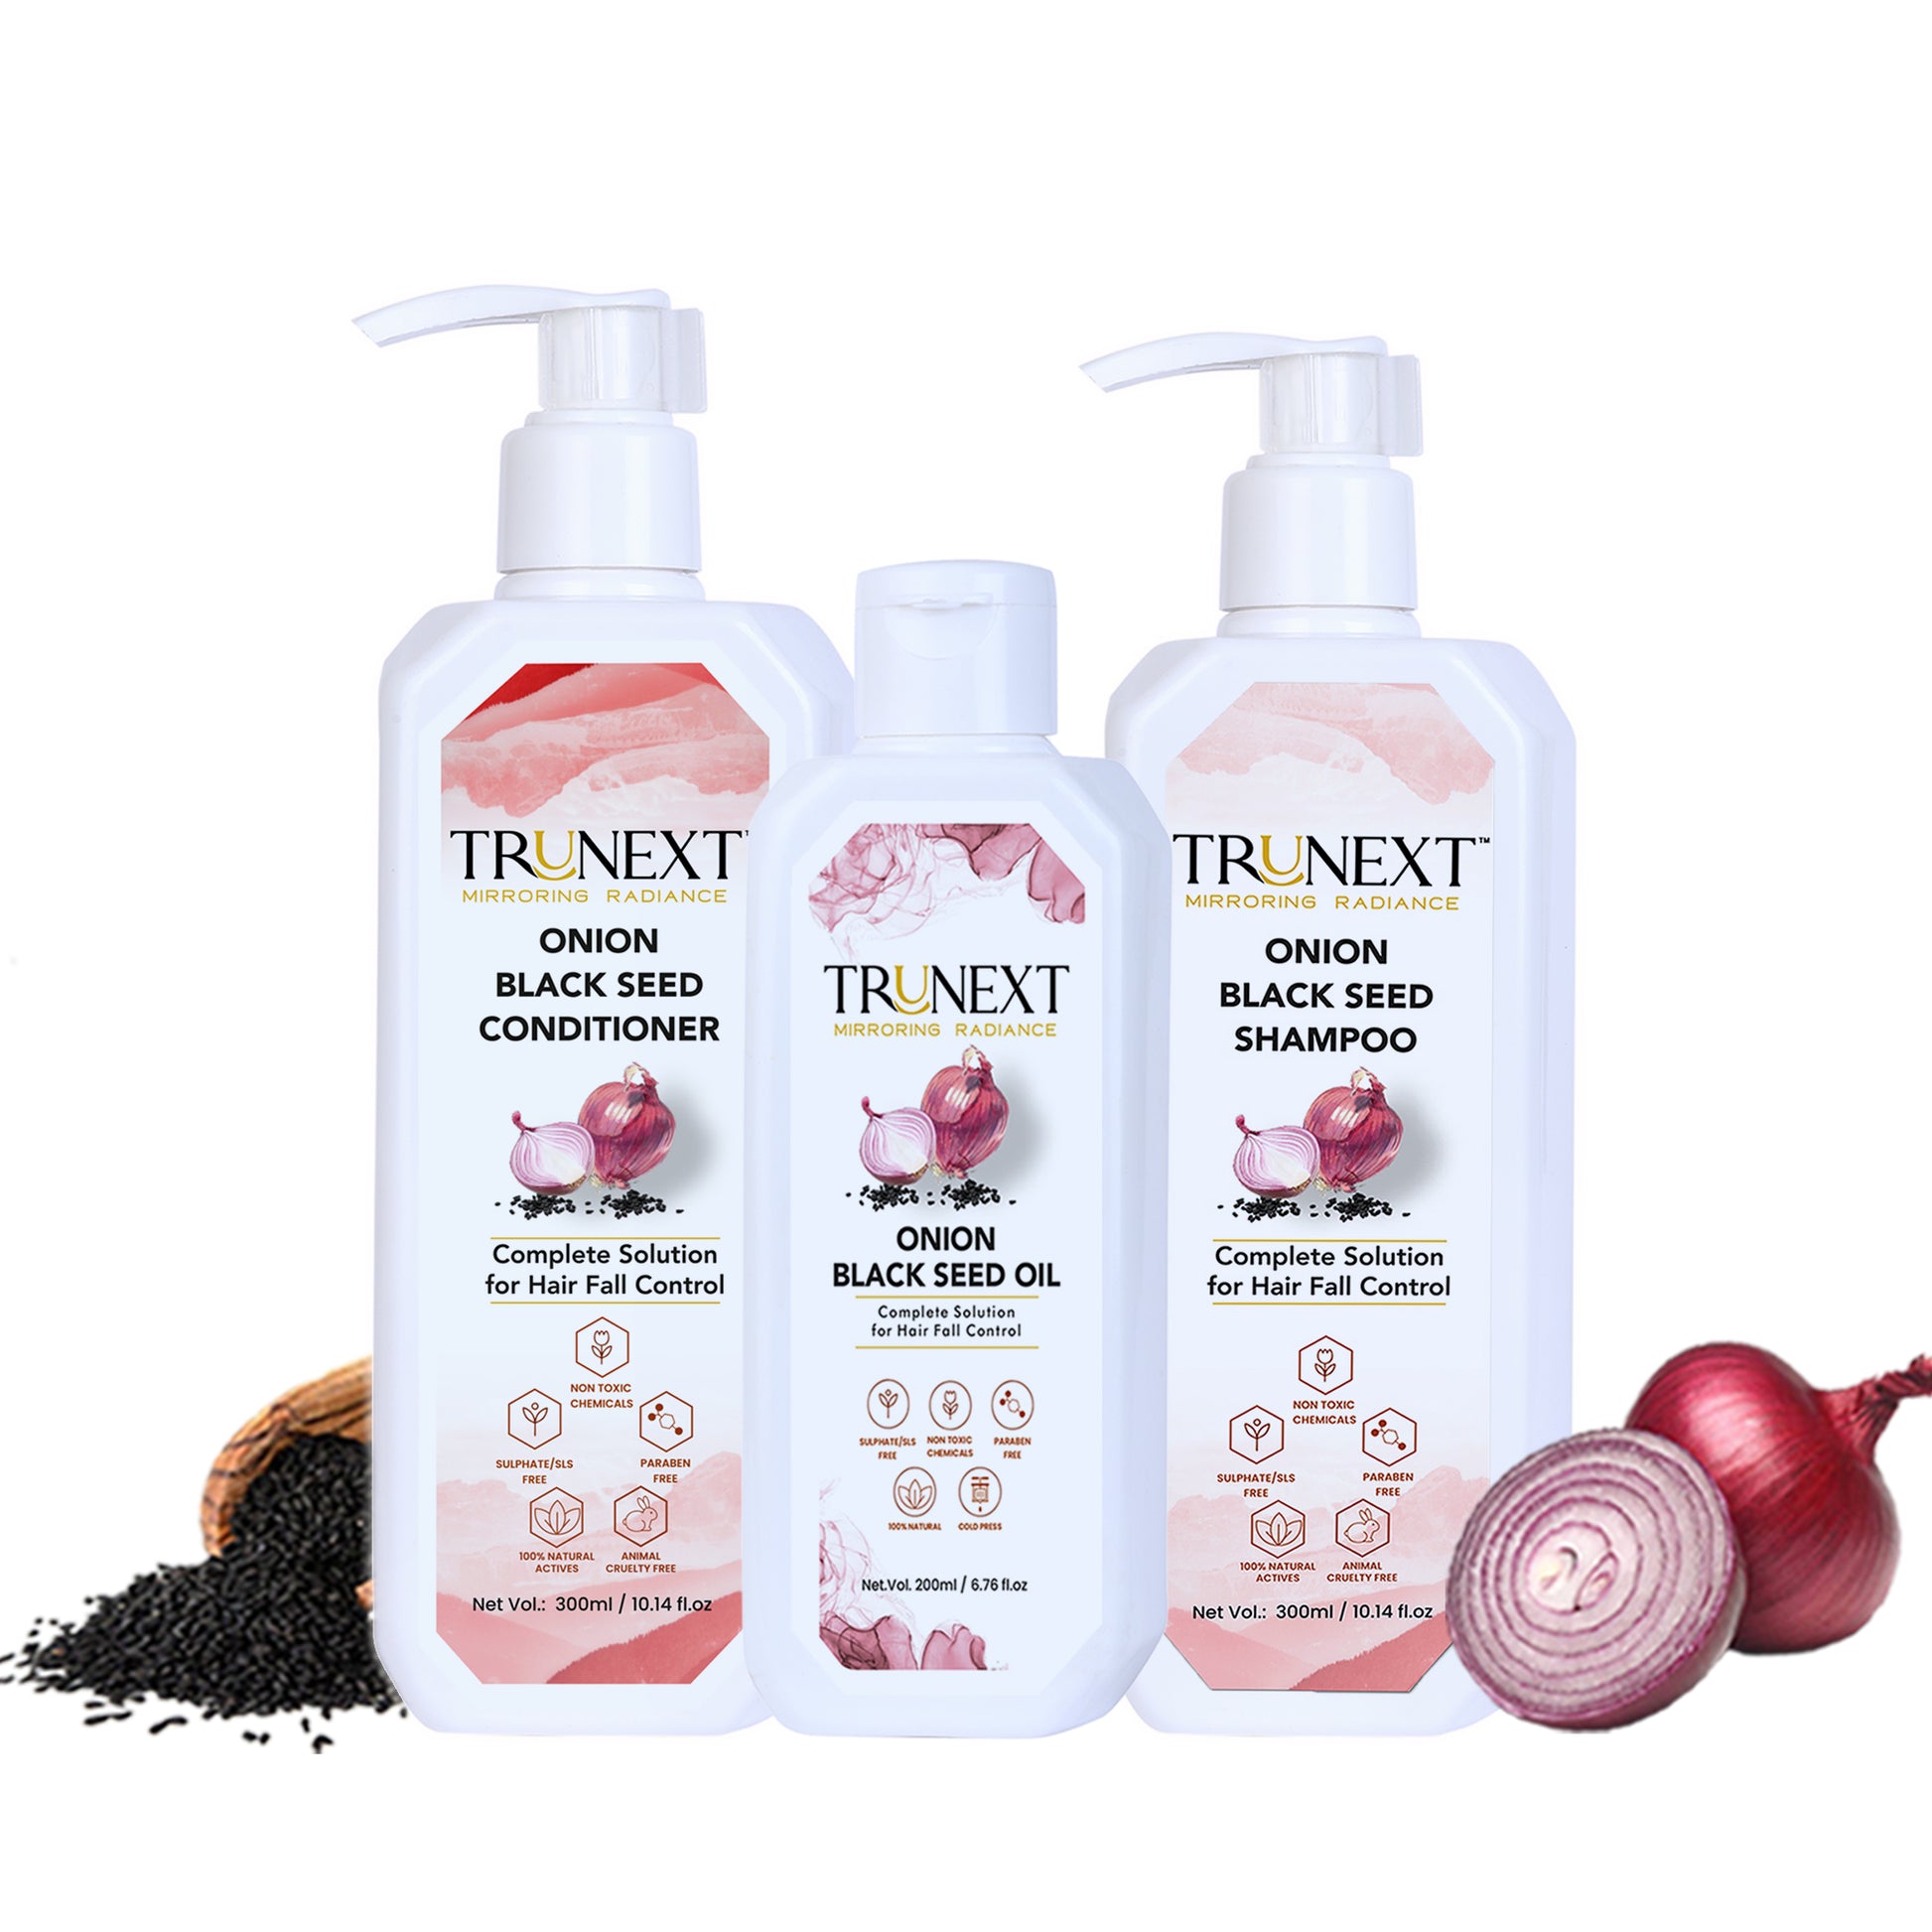 Hairfall Rescue Trio: Onion Black Seed Oil, Shampoo and Conditioner